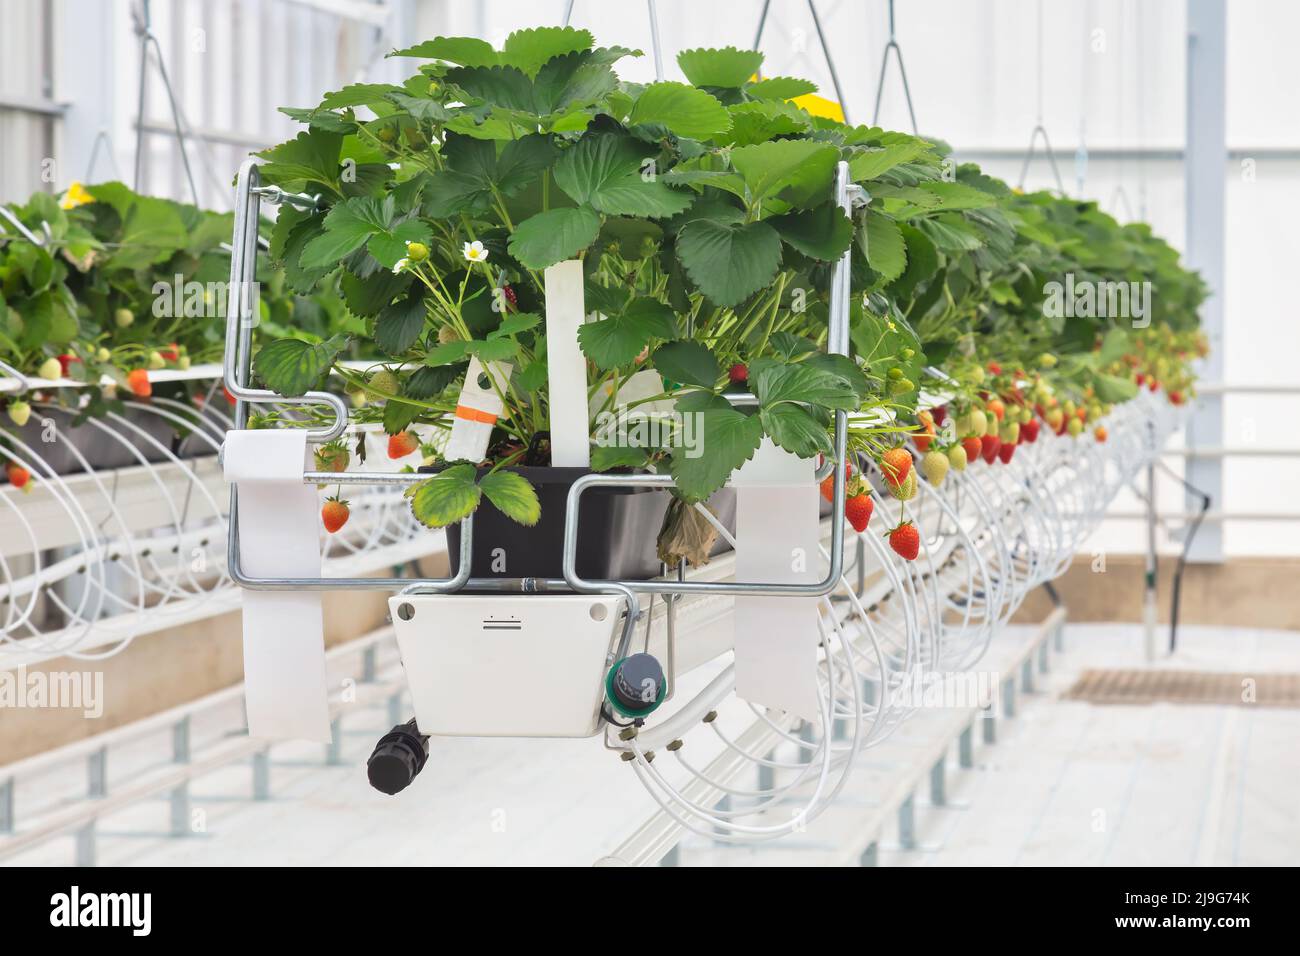 Hydroponic industrial growth of strawberry plants in a Dutch greenhouse Stock Photo